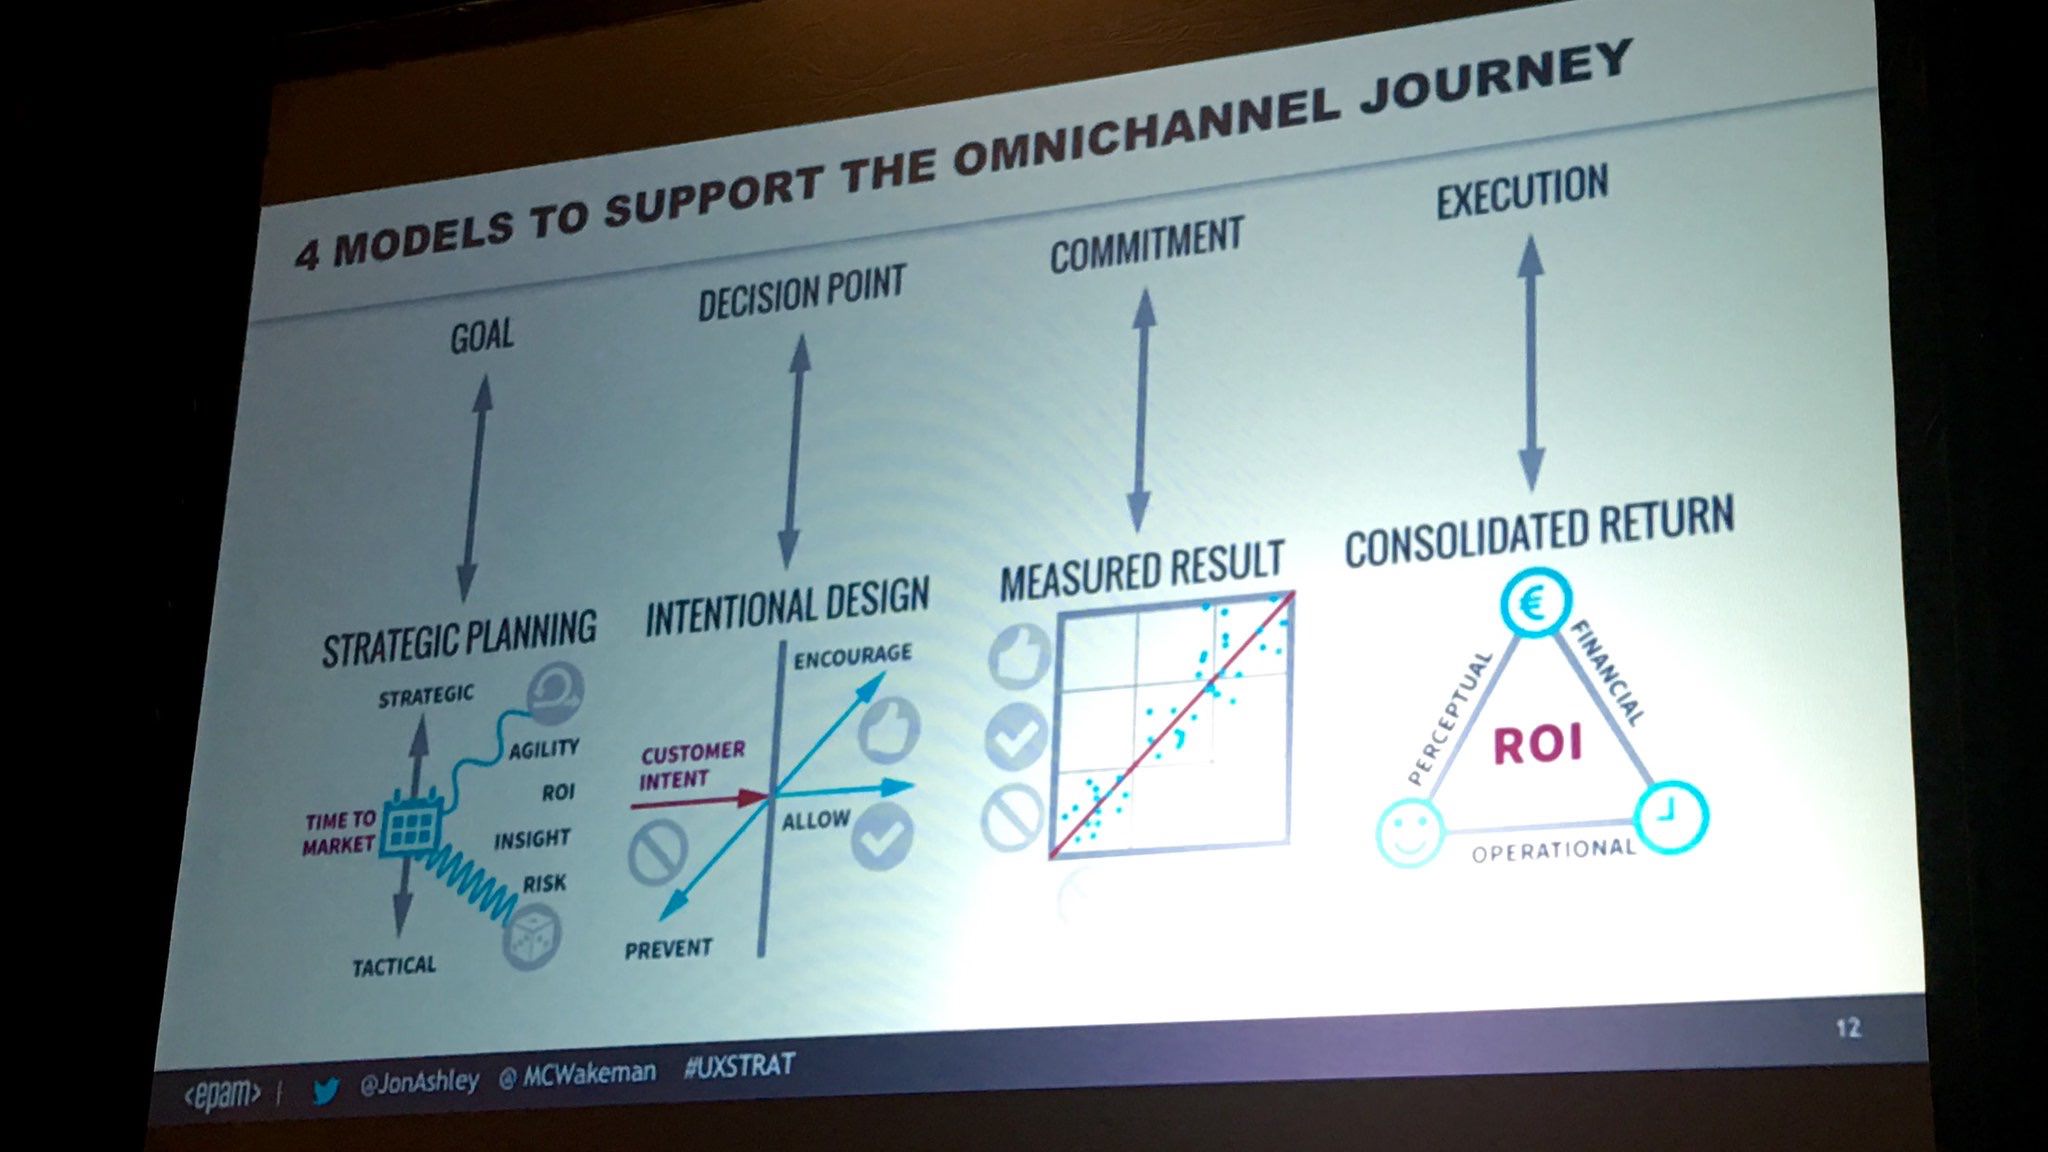 Four models to support the omni-channel journey